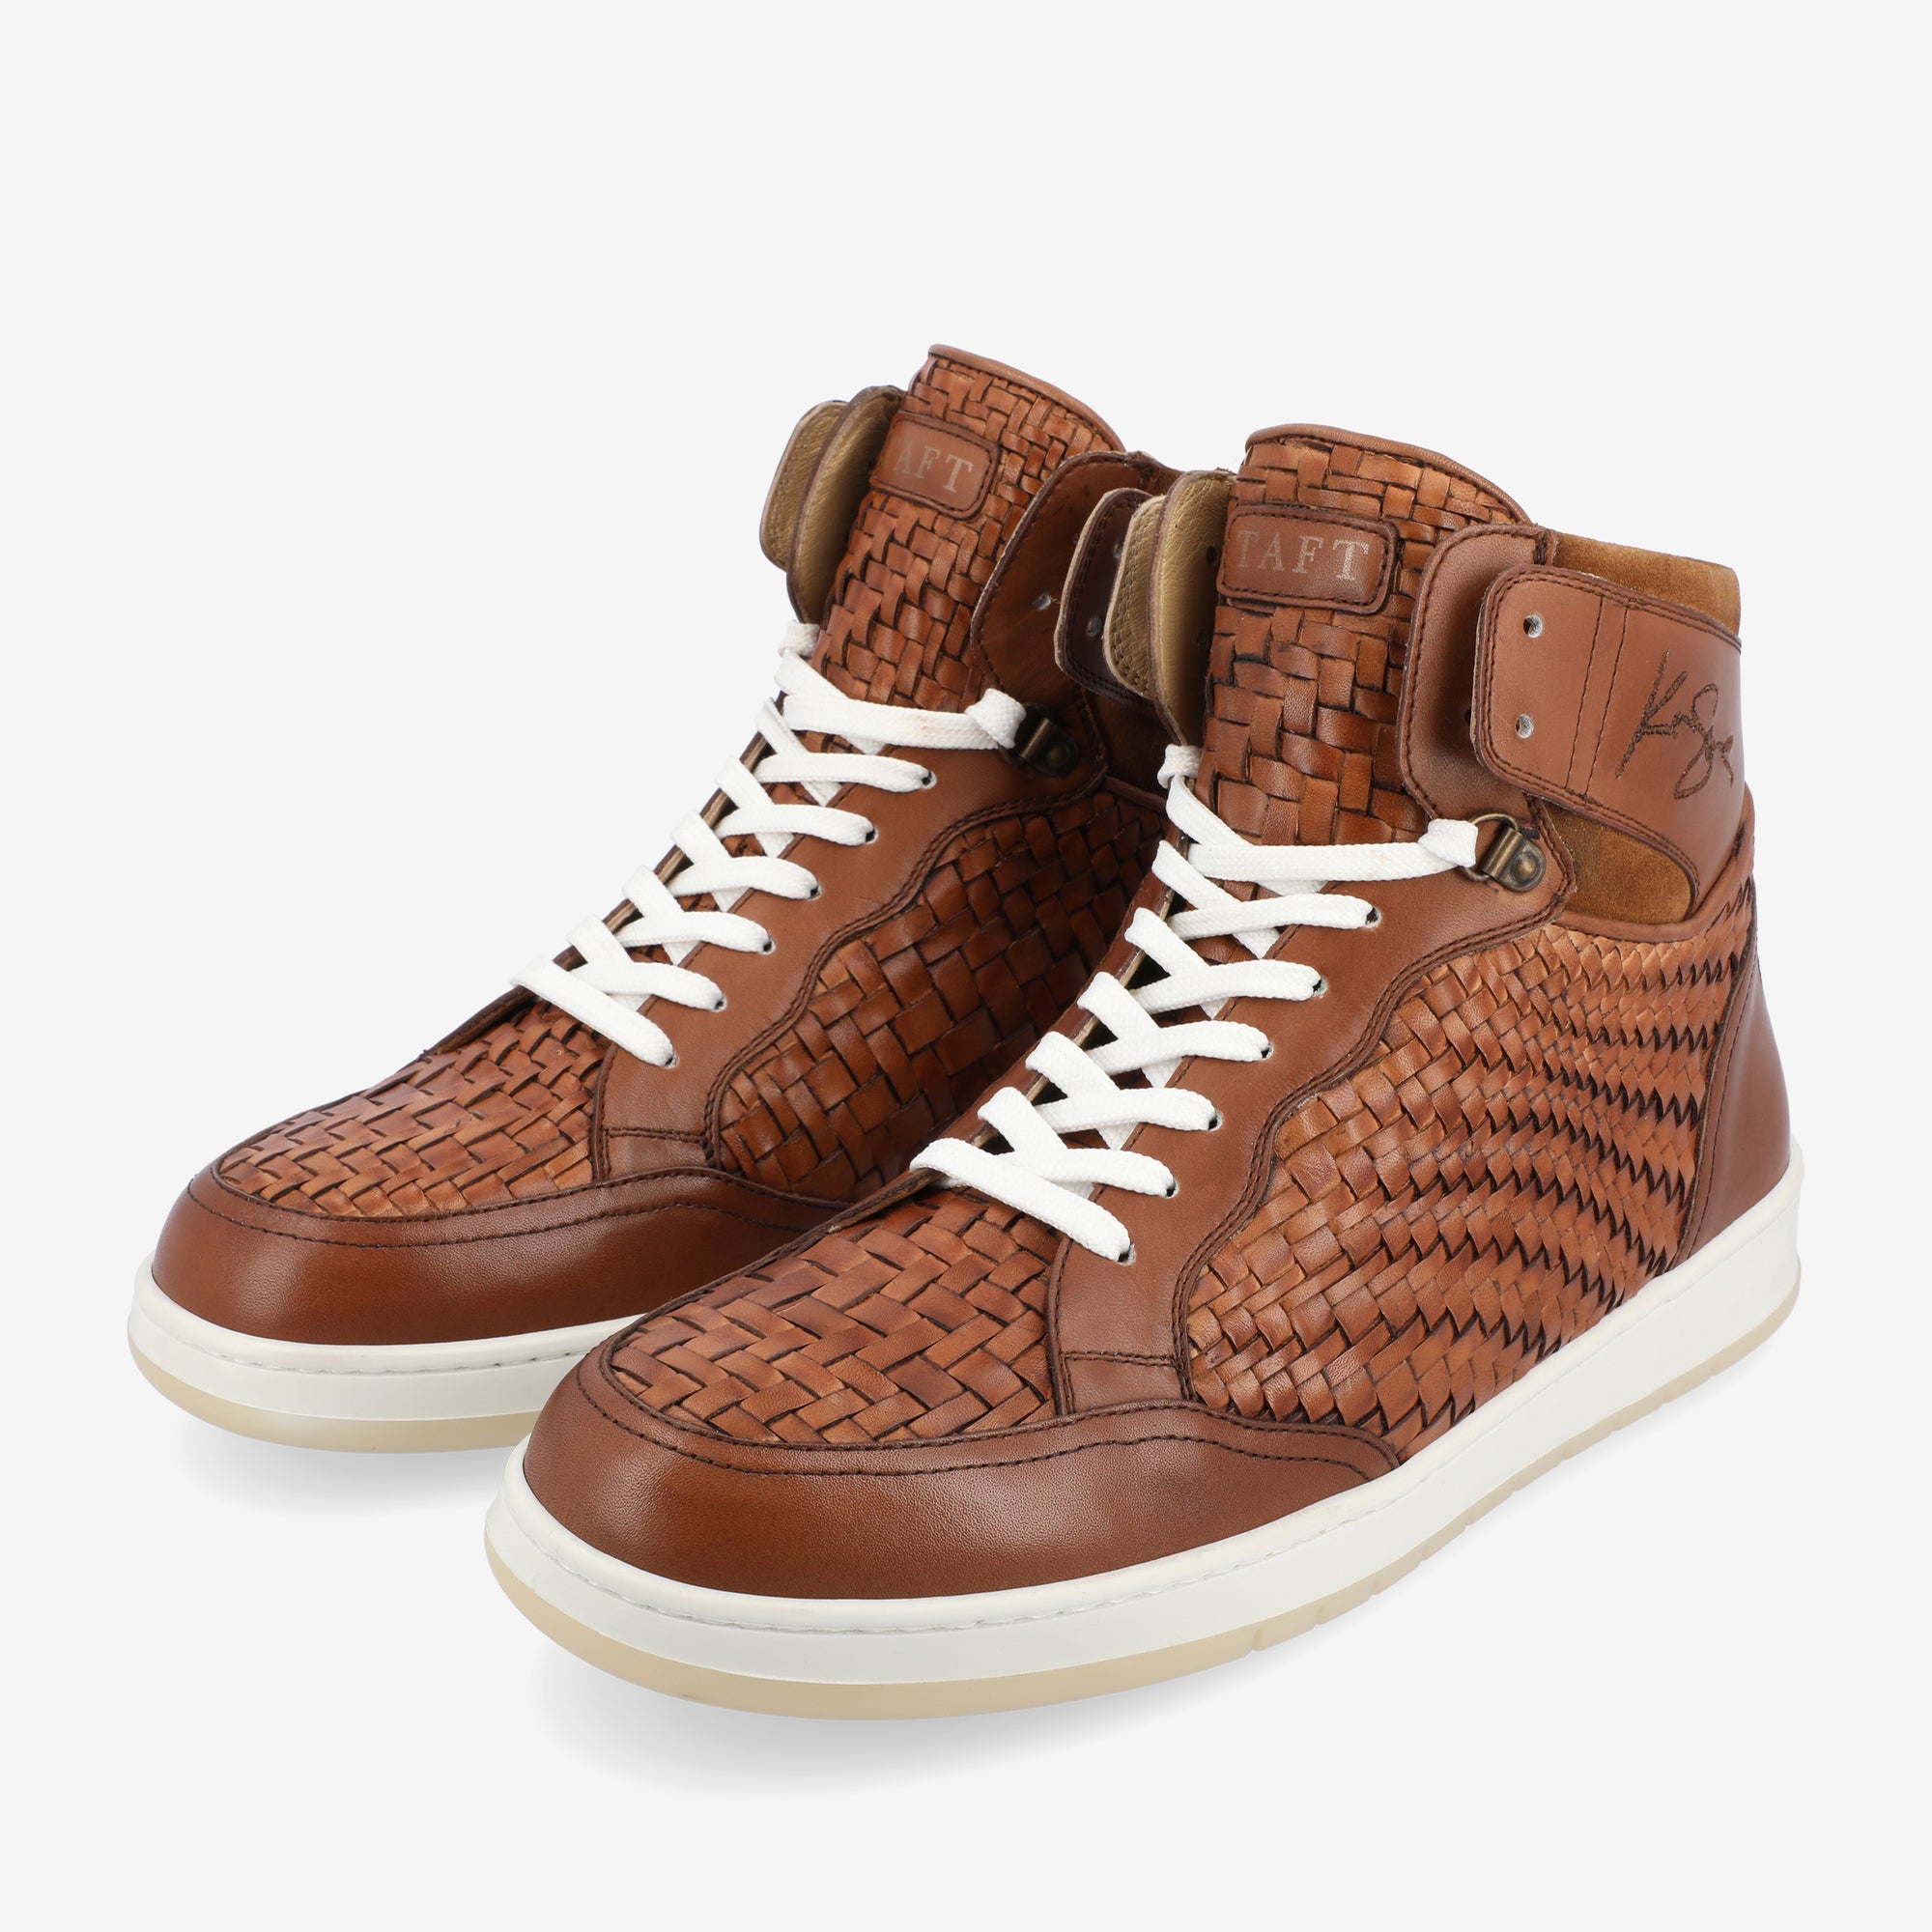 The Rapido High-top Sneaker in Brown Woven (Last Chance, Final Sale)